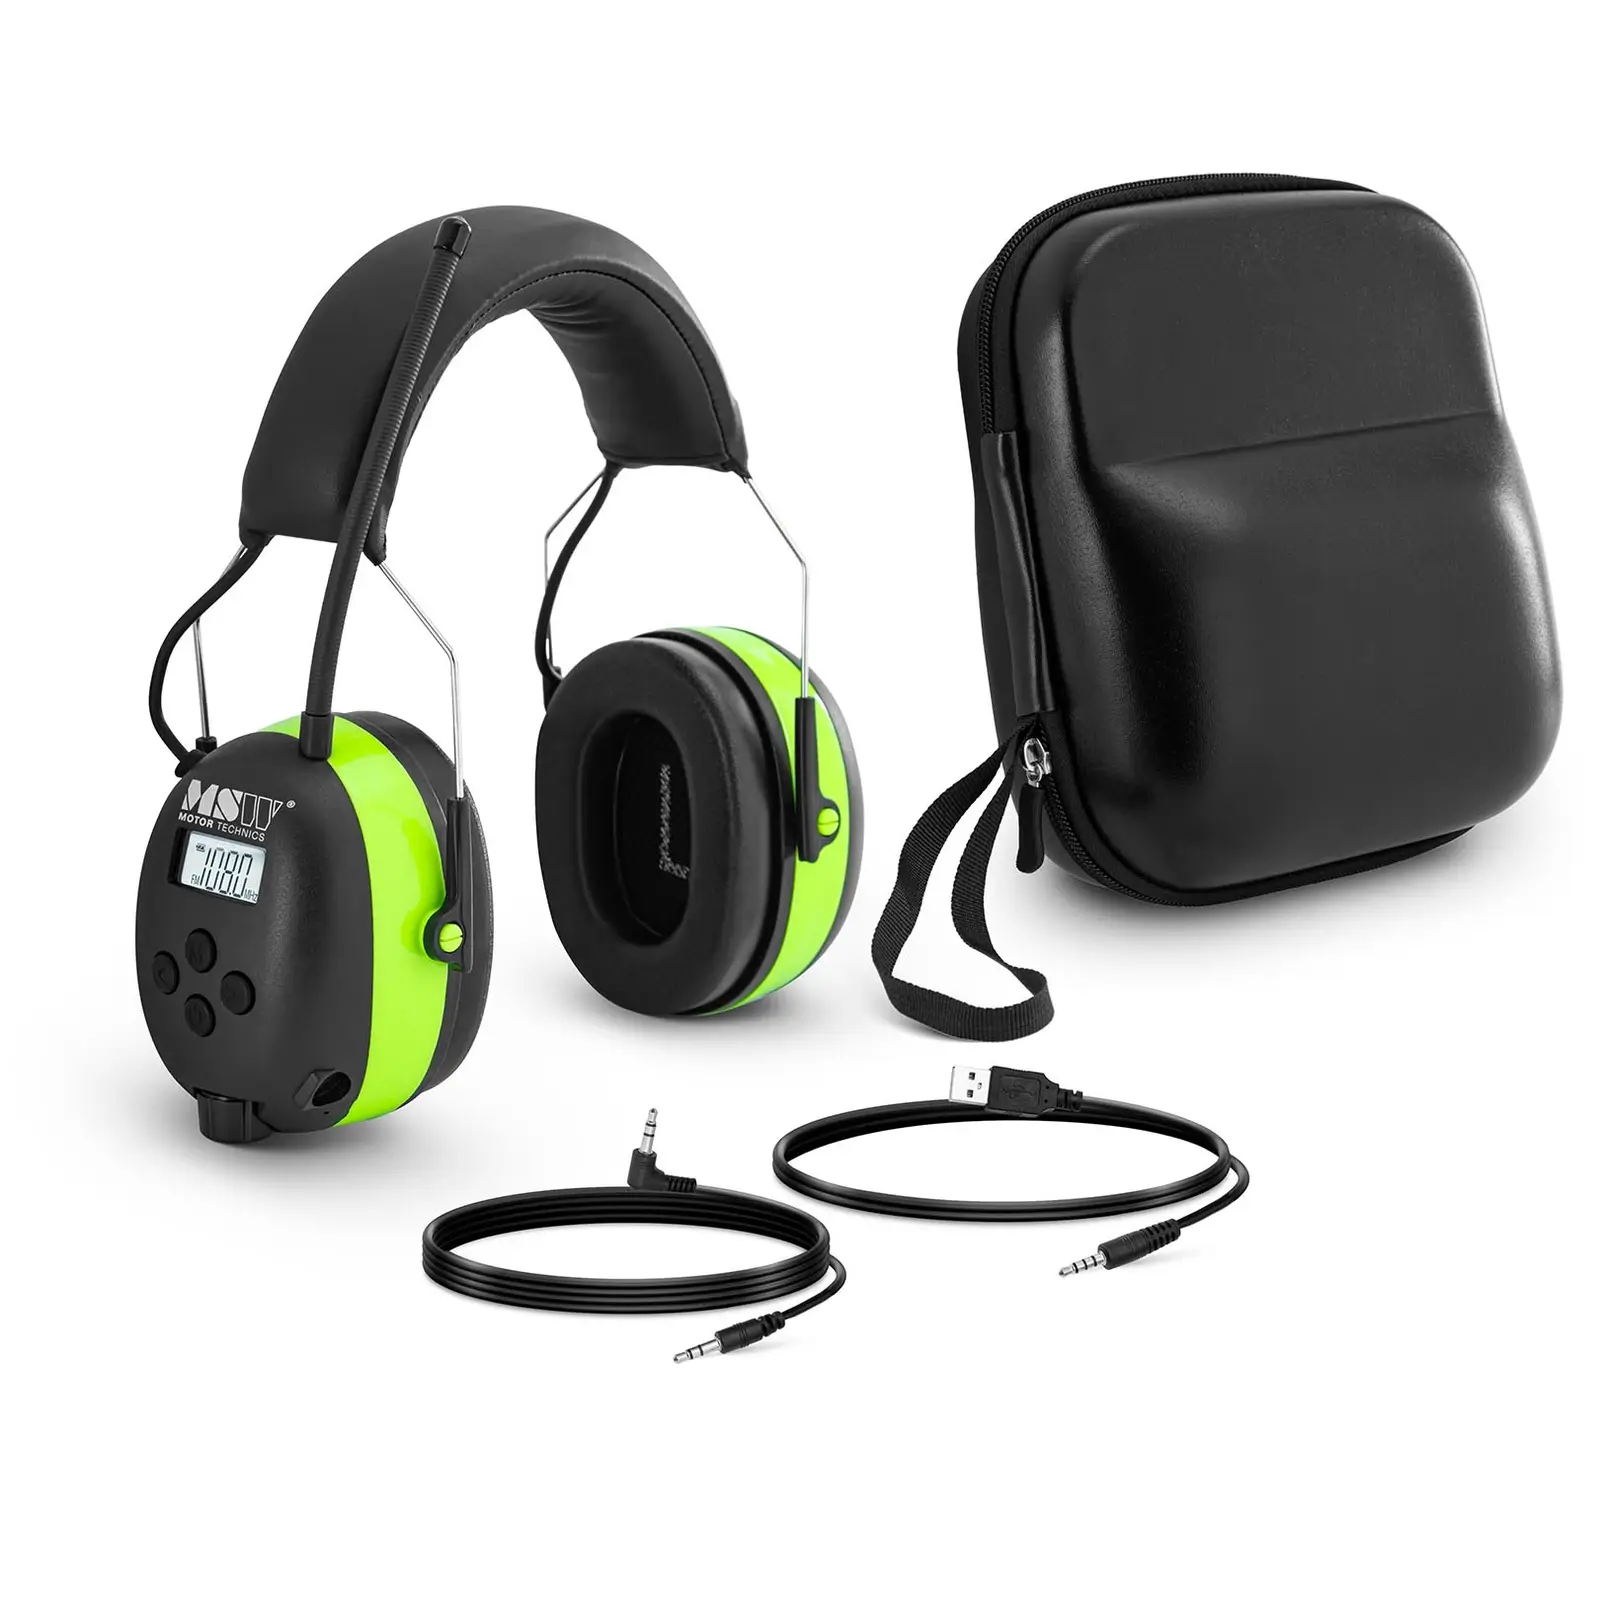 Bluetooth Noise Cancelling Headphones - microphone - LCD display - rechargeable battery - green